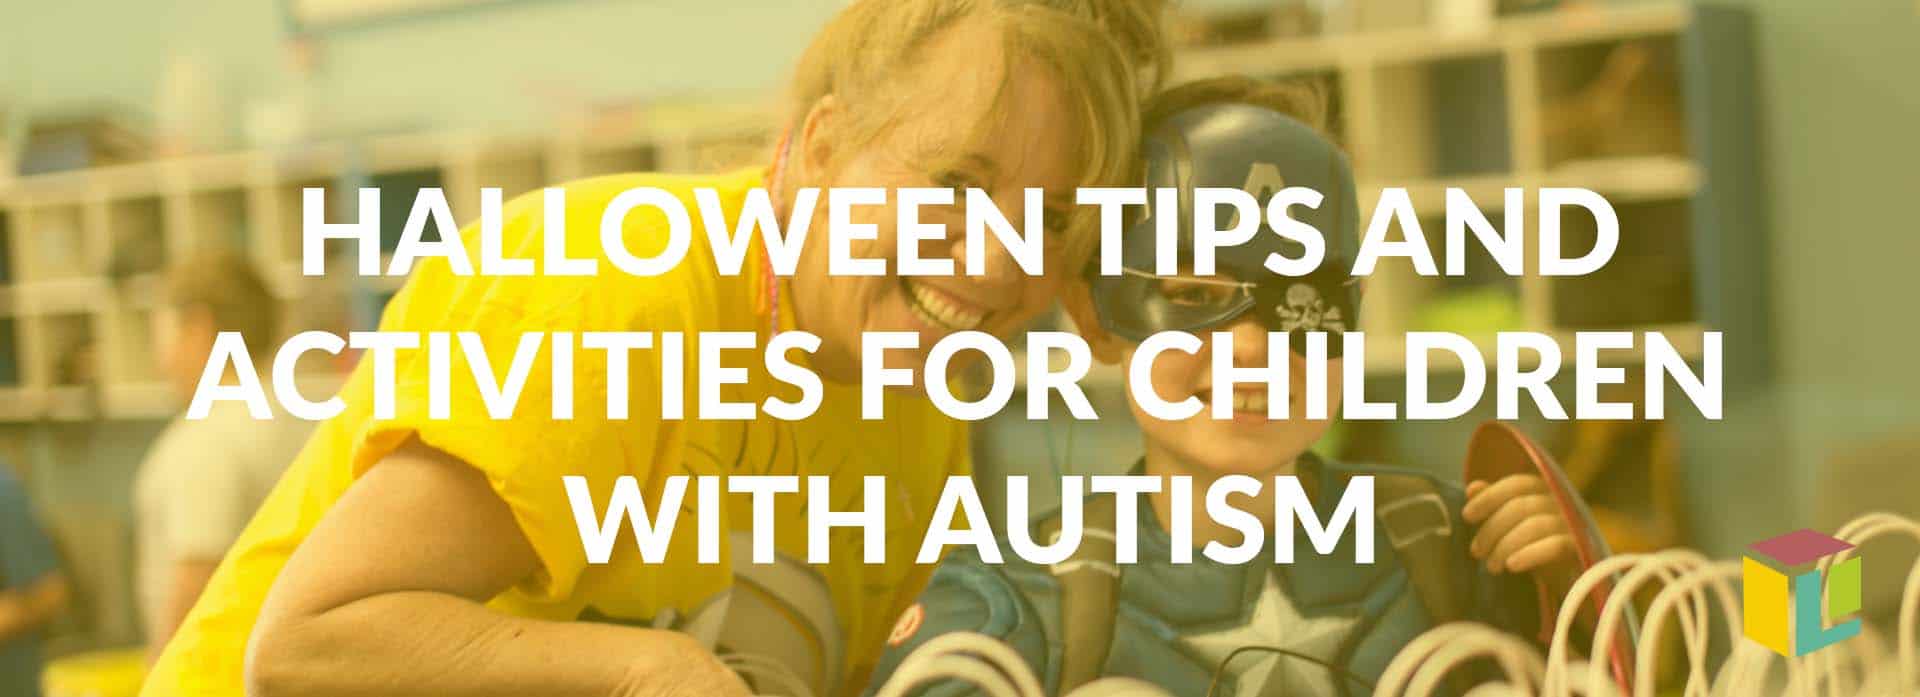 Halloween Tips And Activities For Children With Autism